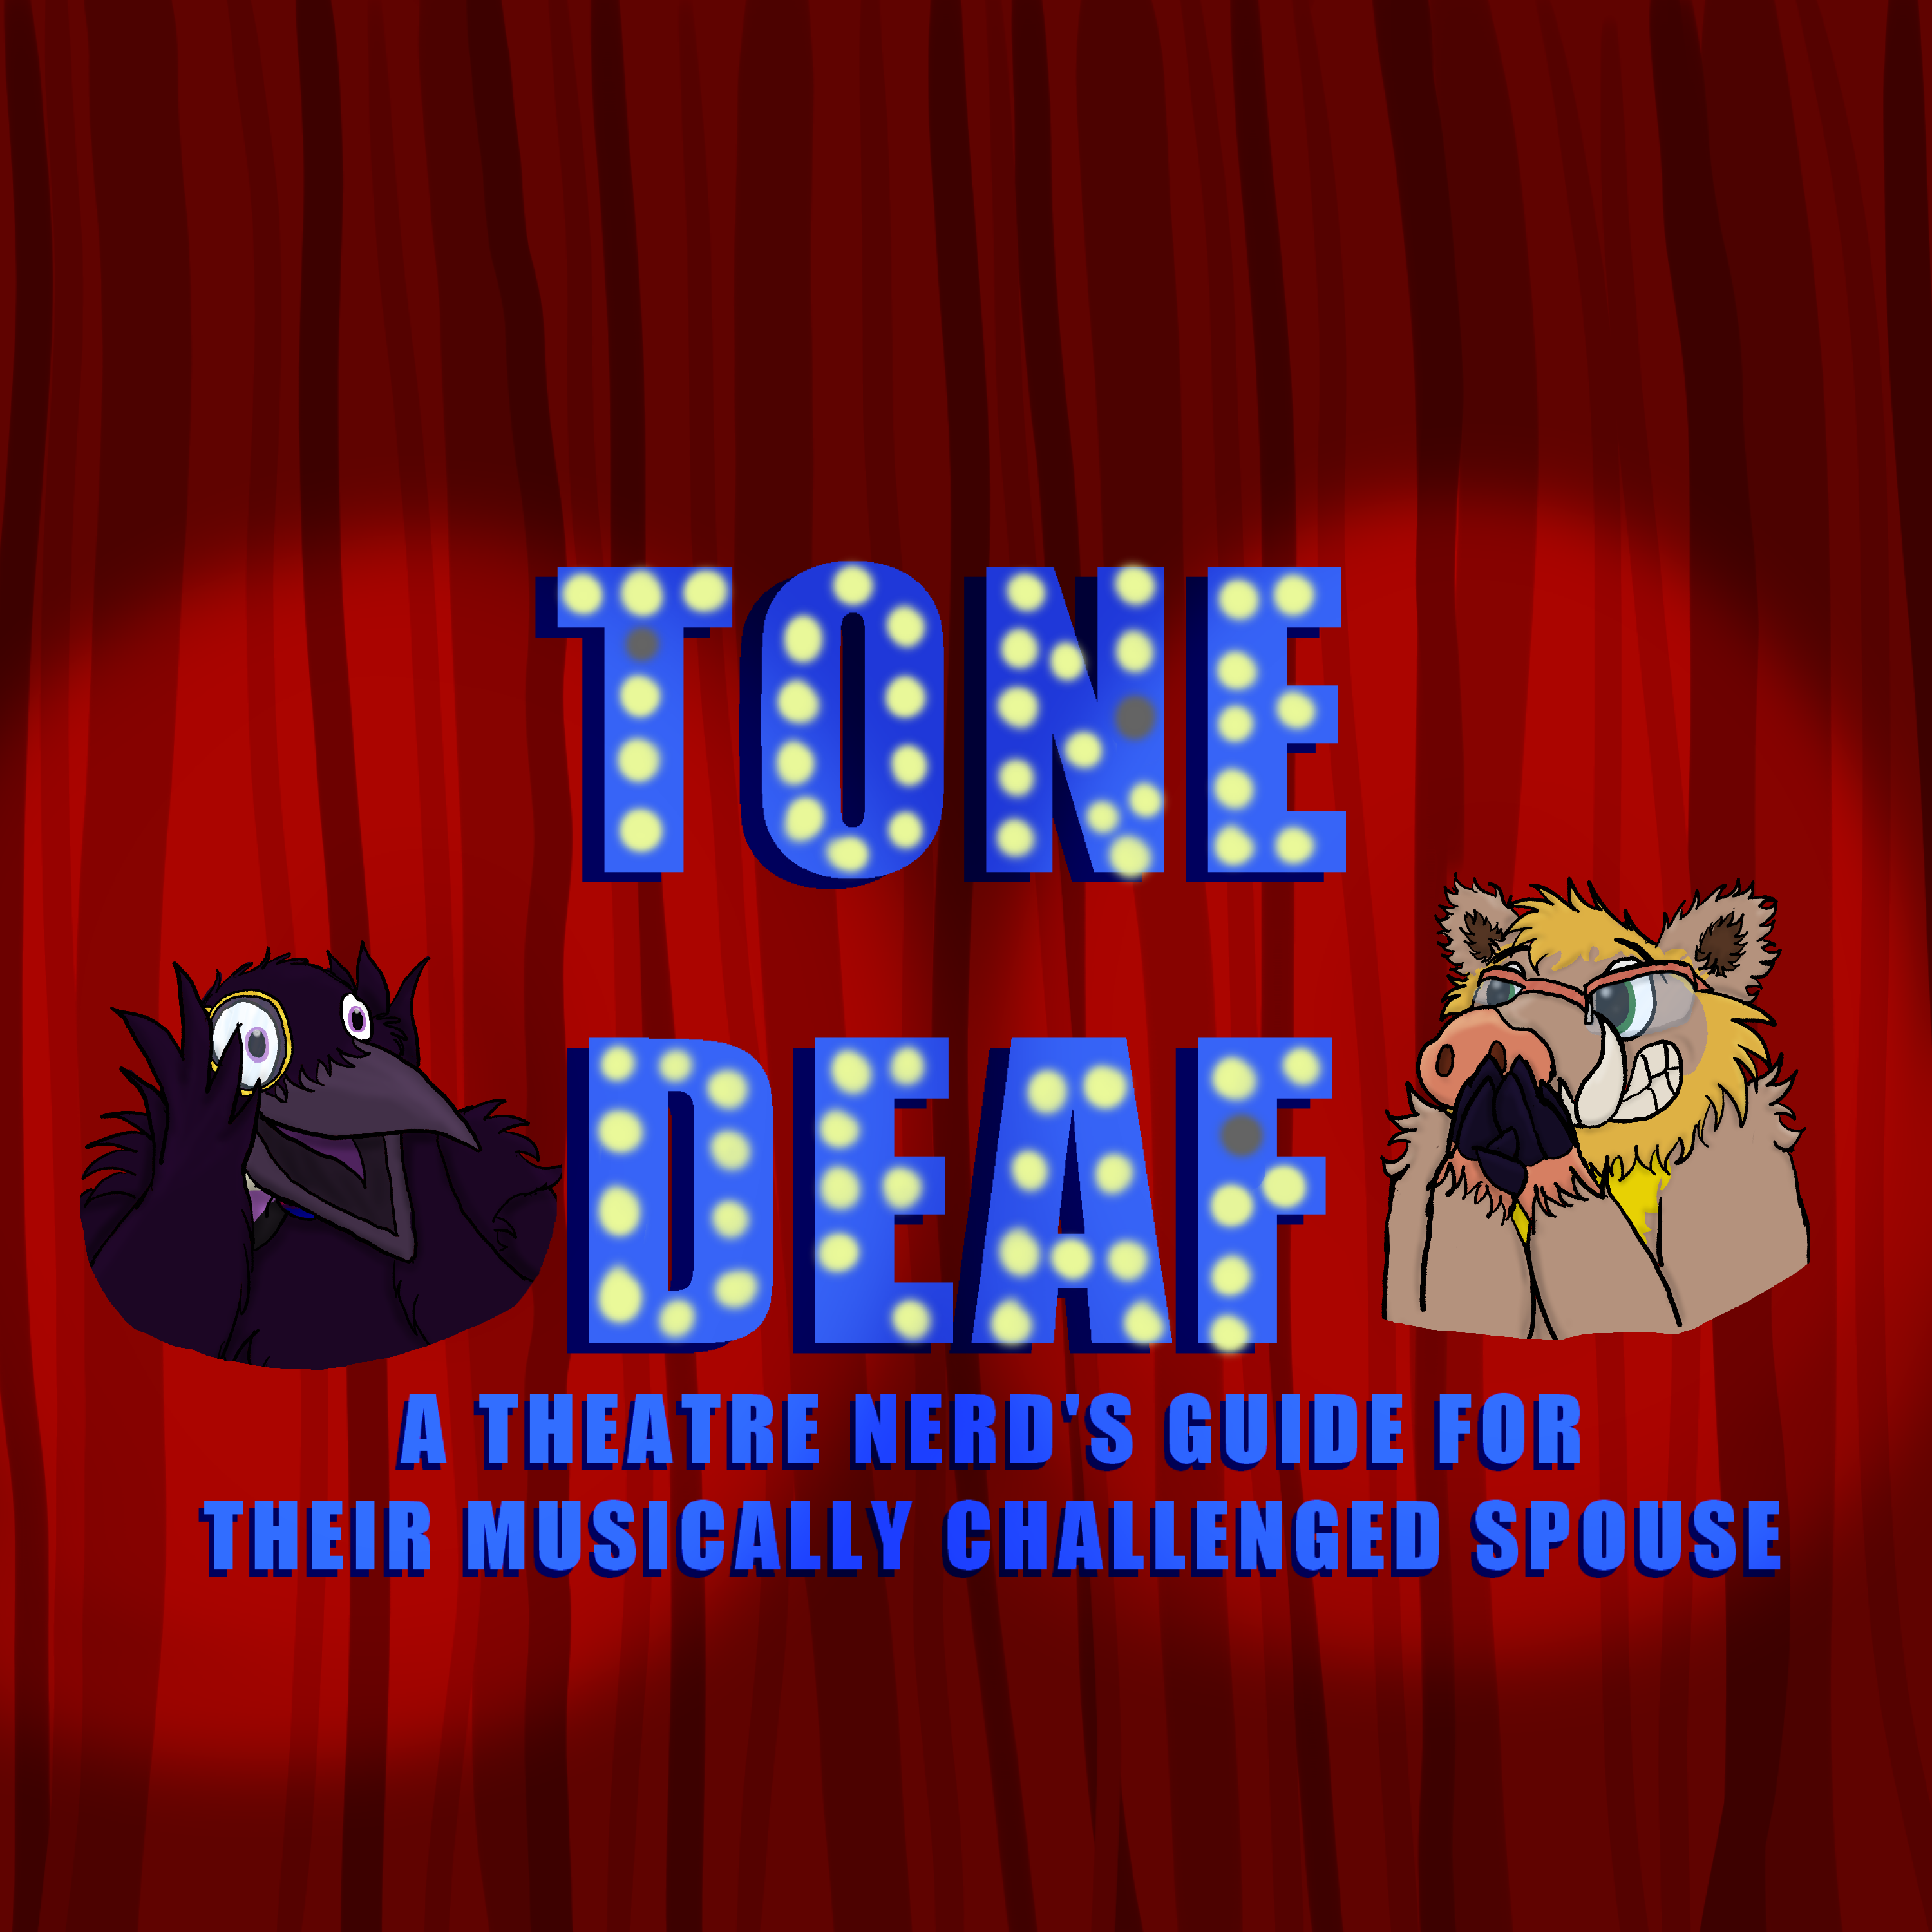 The logo for Tone Deaf: A Theatre Nerd's Guide for their Musically Challenged Spouse. A Raven with a monacle and bowtie is holding their face in excitement while a wild boar in glasses grins excitedly and claps his hands. They are in front of a red curtain. Between them are the words 'Tone Deaf A Theatre Nerd's Guide for their Musically Challenged Spouse' in Blue with lights that are intermittently on.